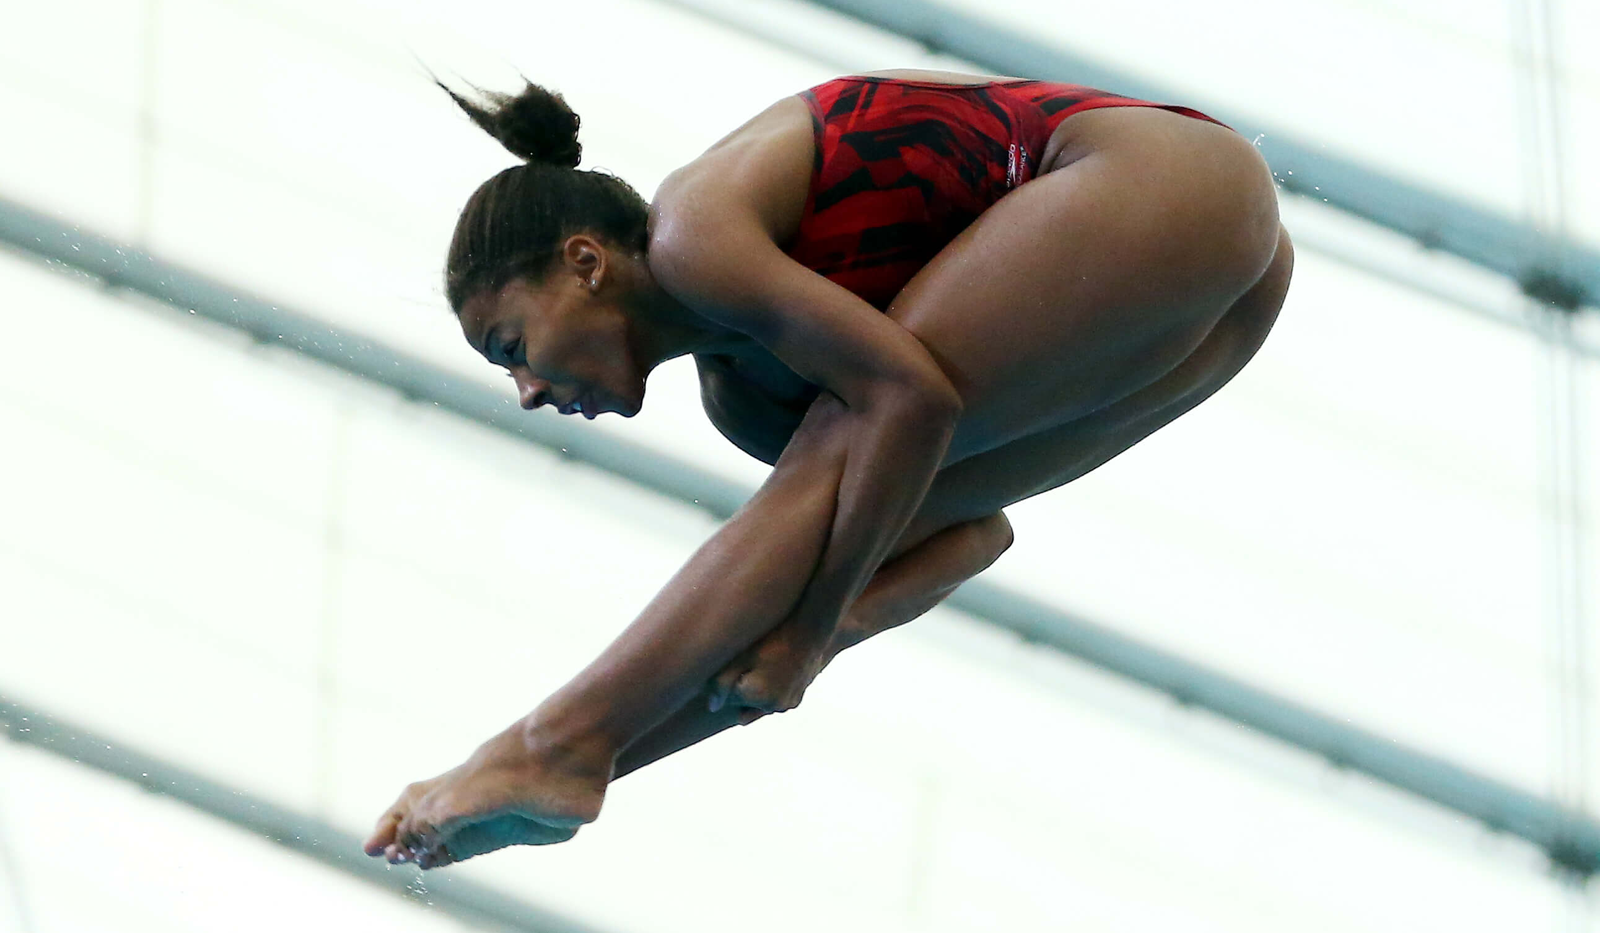 Beijing: Canada wins two more medals on Day 2